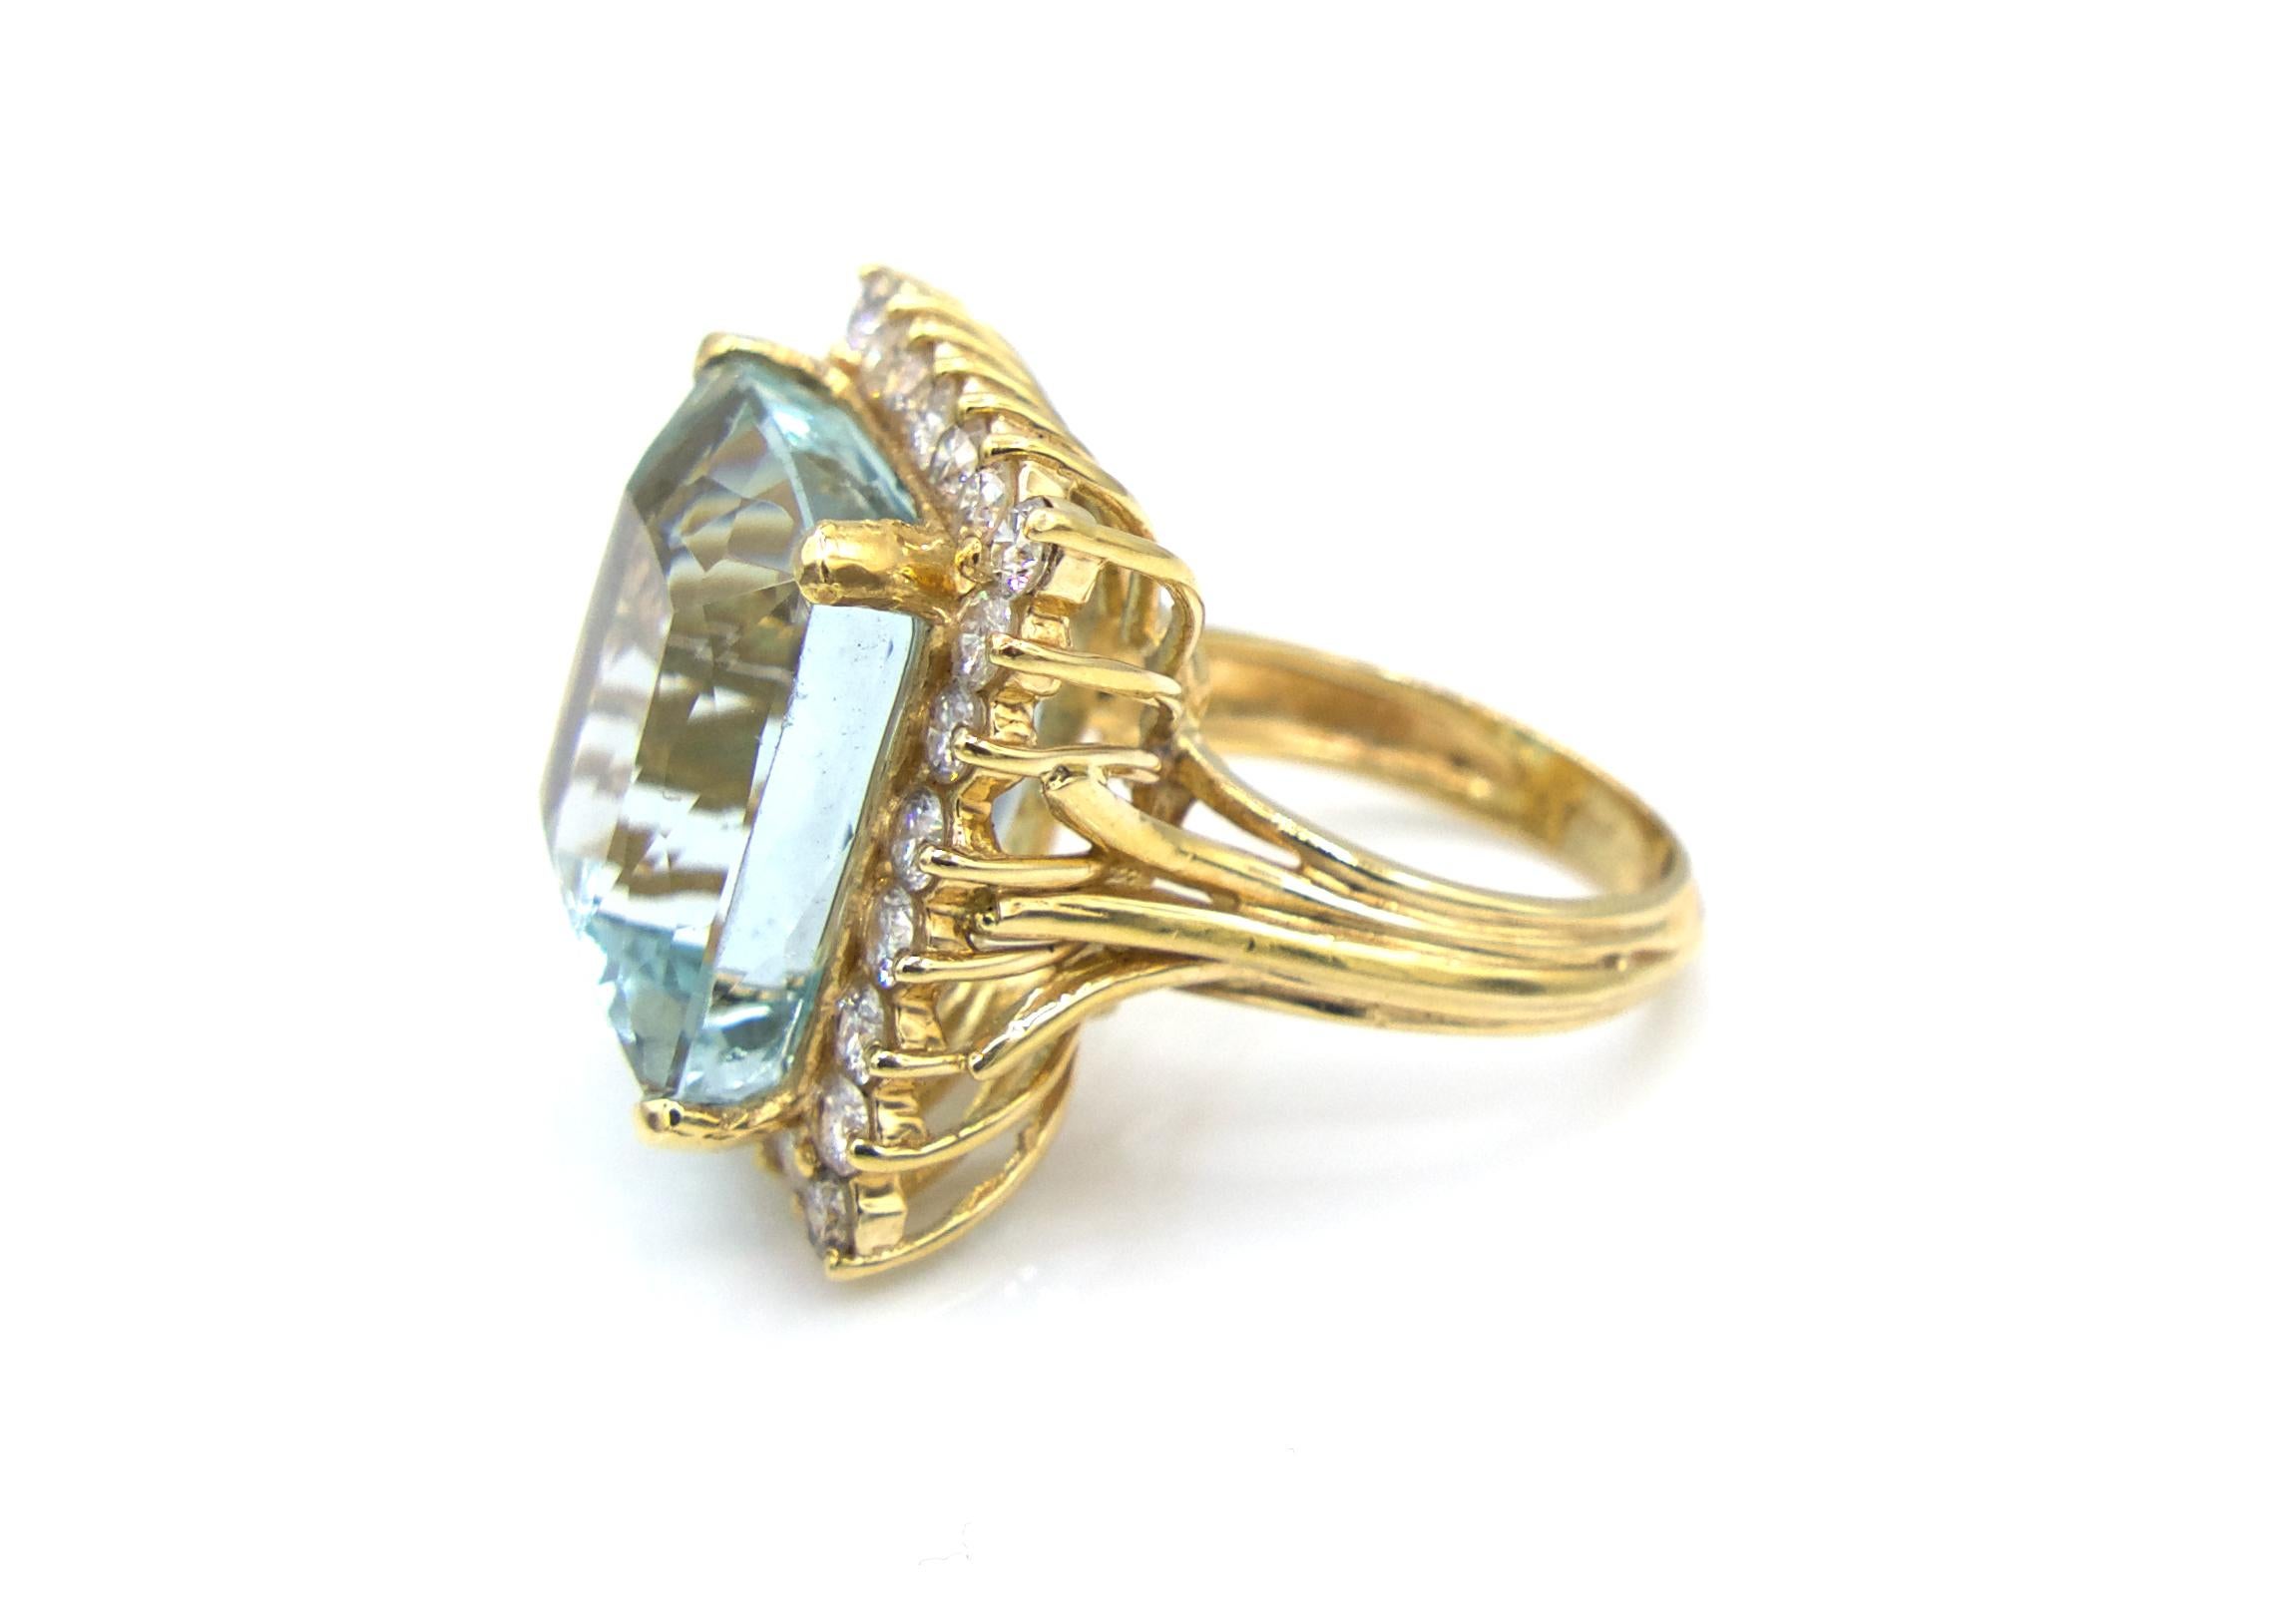 This original Ben Moses Jewelry Design ring is made with a remarkably bright 20 Carat Aquamarine center stone and 26 round-cut diamonds, totaling 2 carats, surrounding it. It also features a classic 14K Yellow Gold cage setting.

12.8 grams

Size